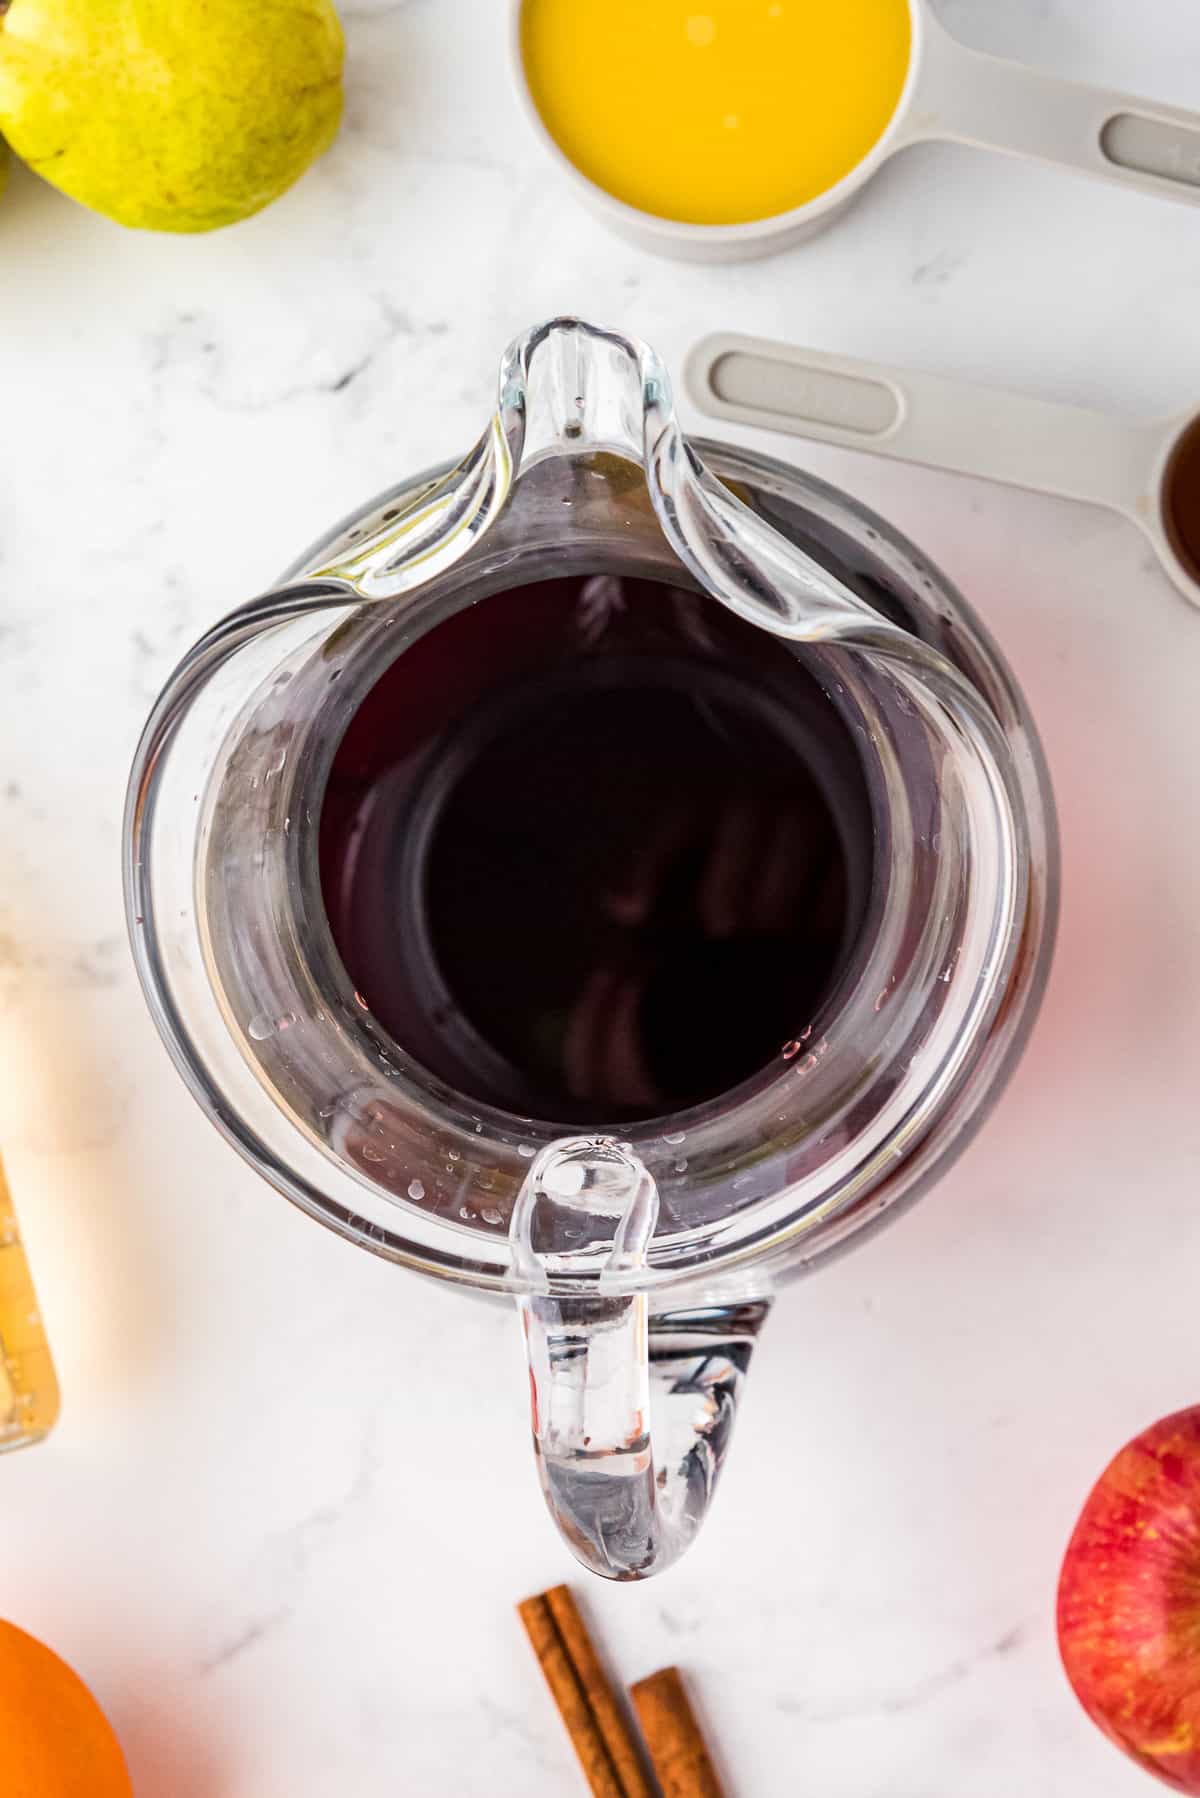 Overhead image of pitcher with red wine